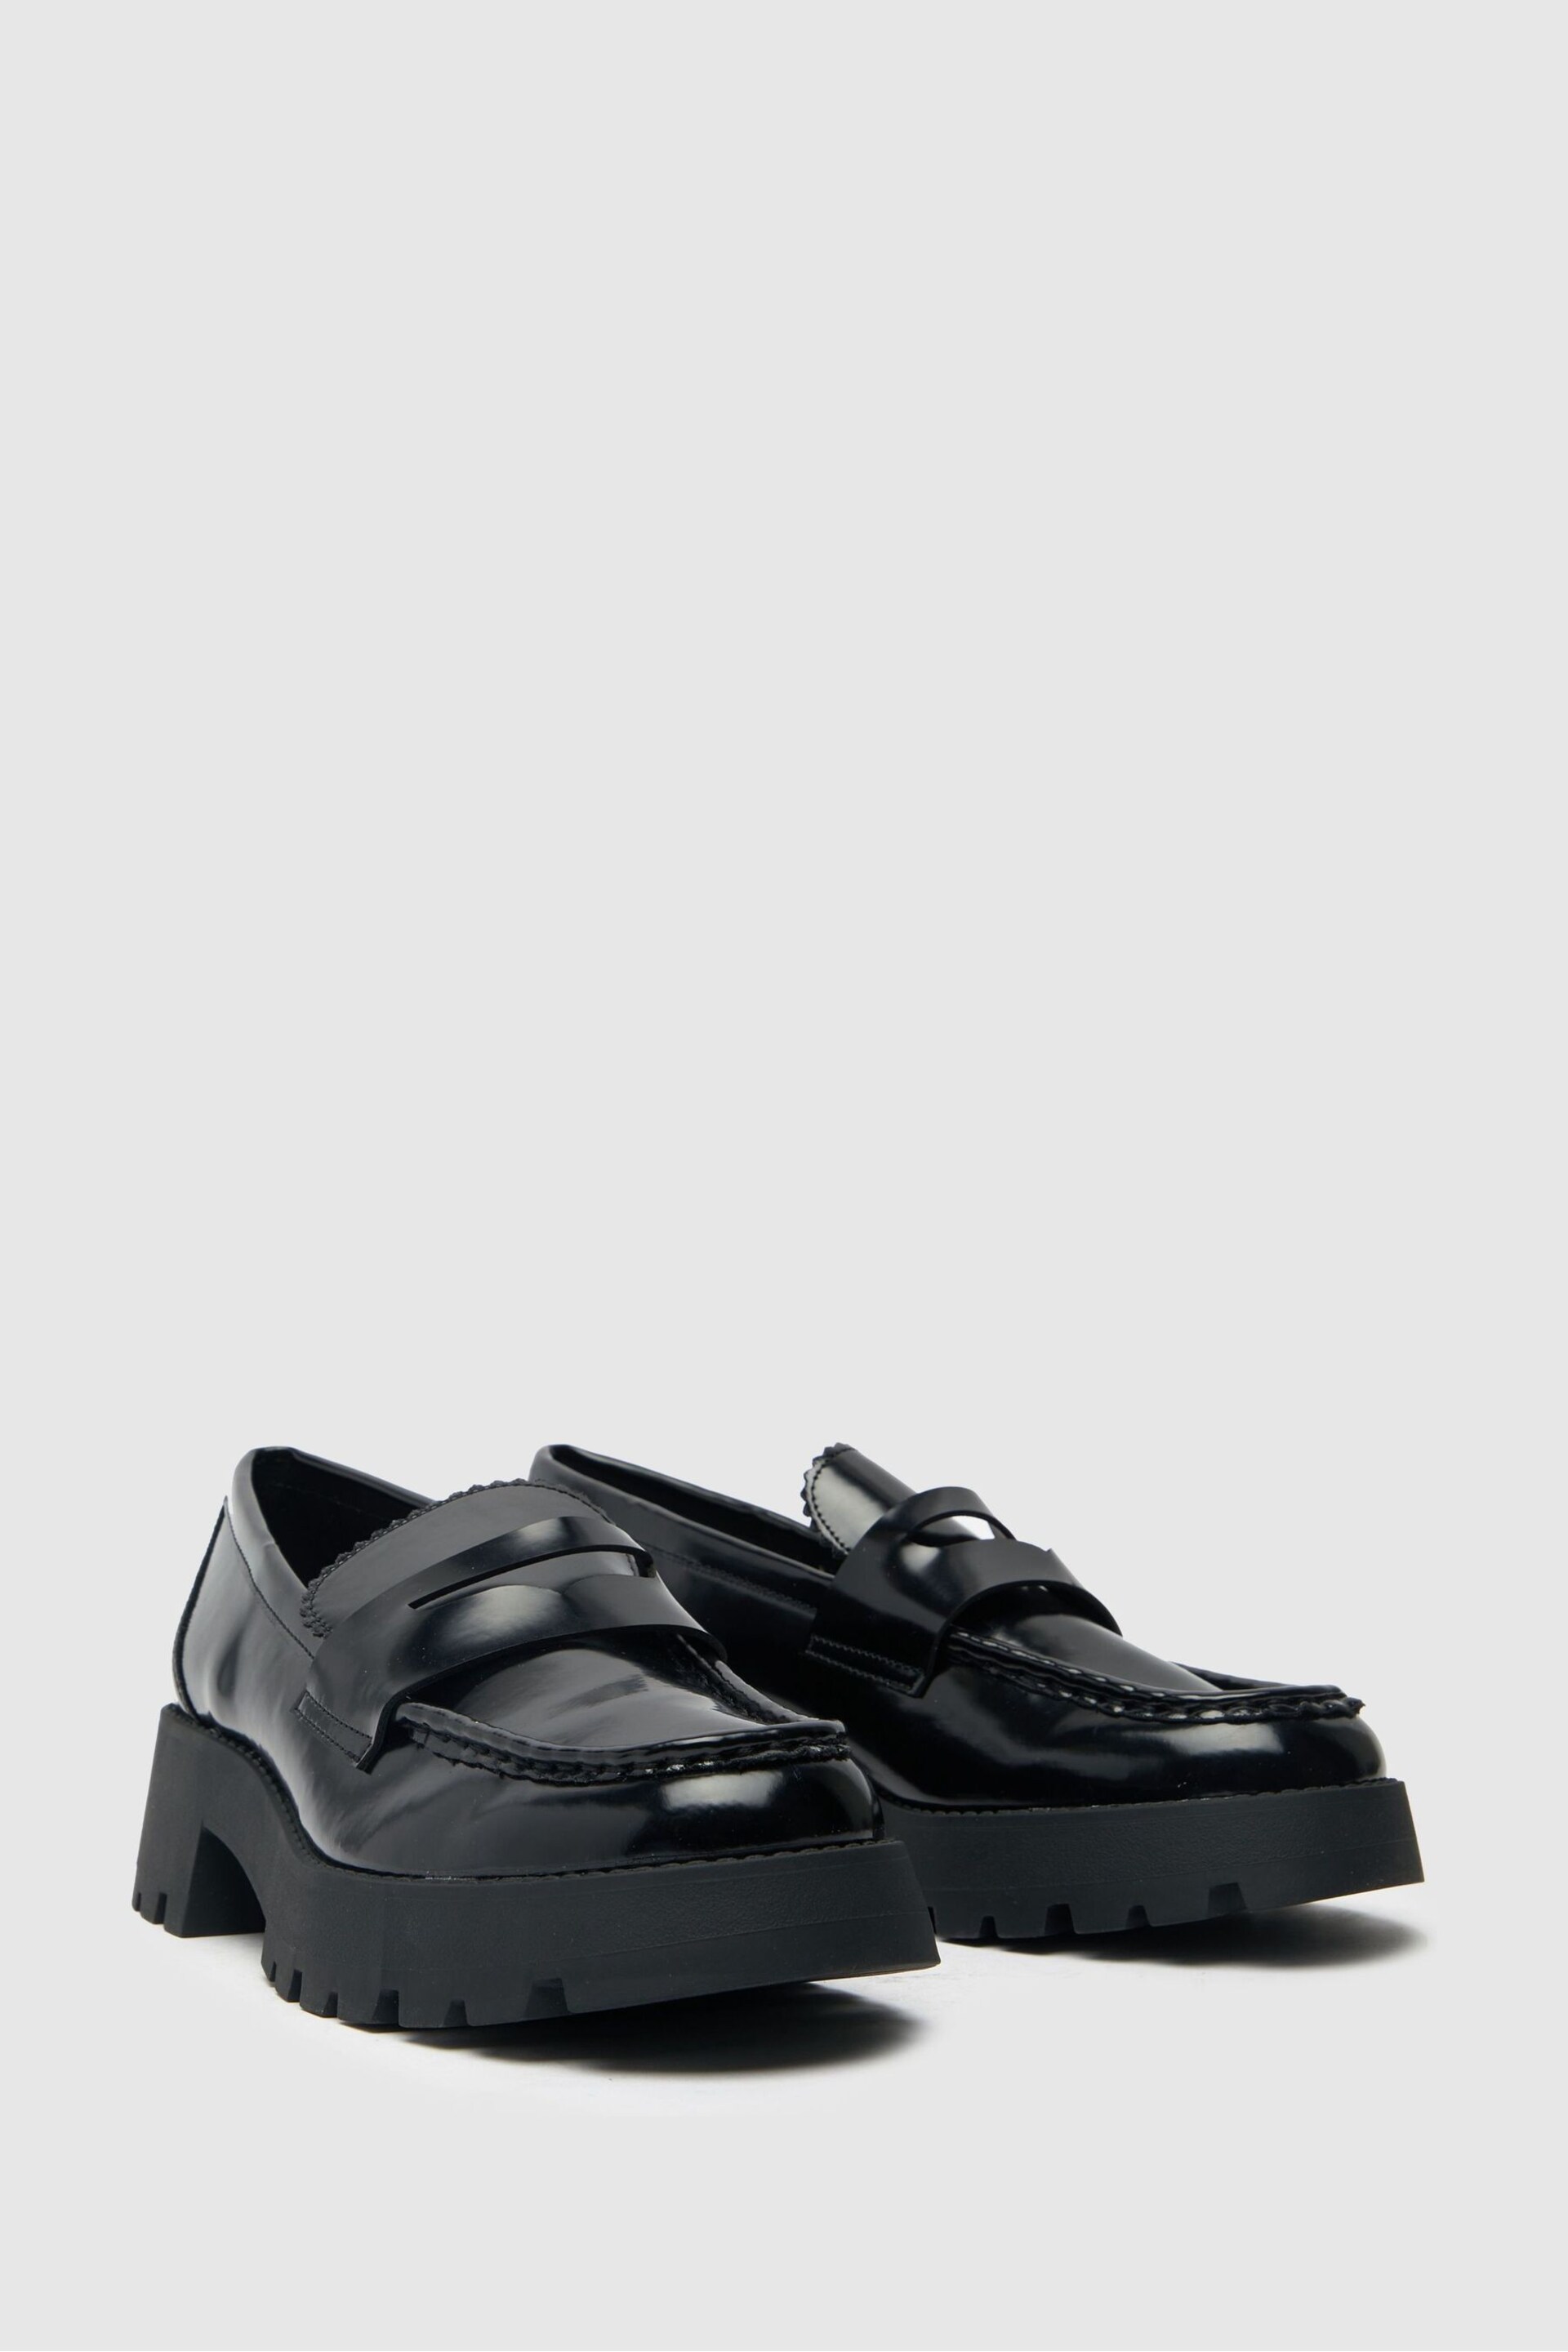 Schuh Levi Chunky Black Loafers - Image 2 of 4